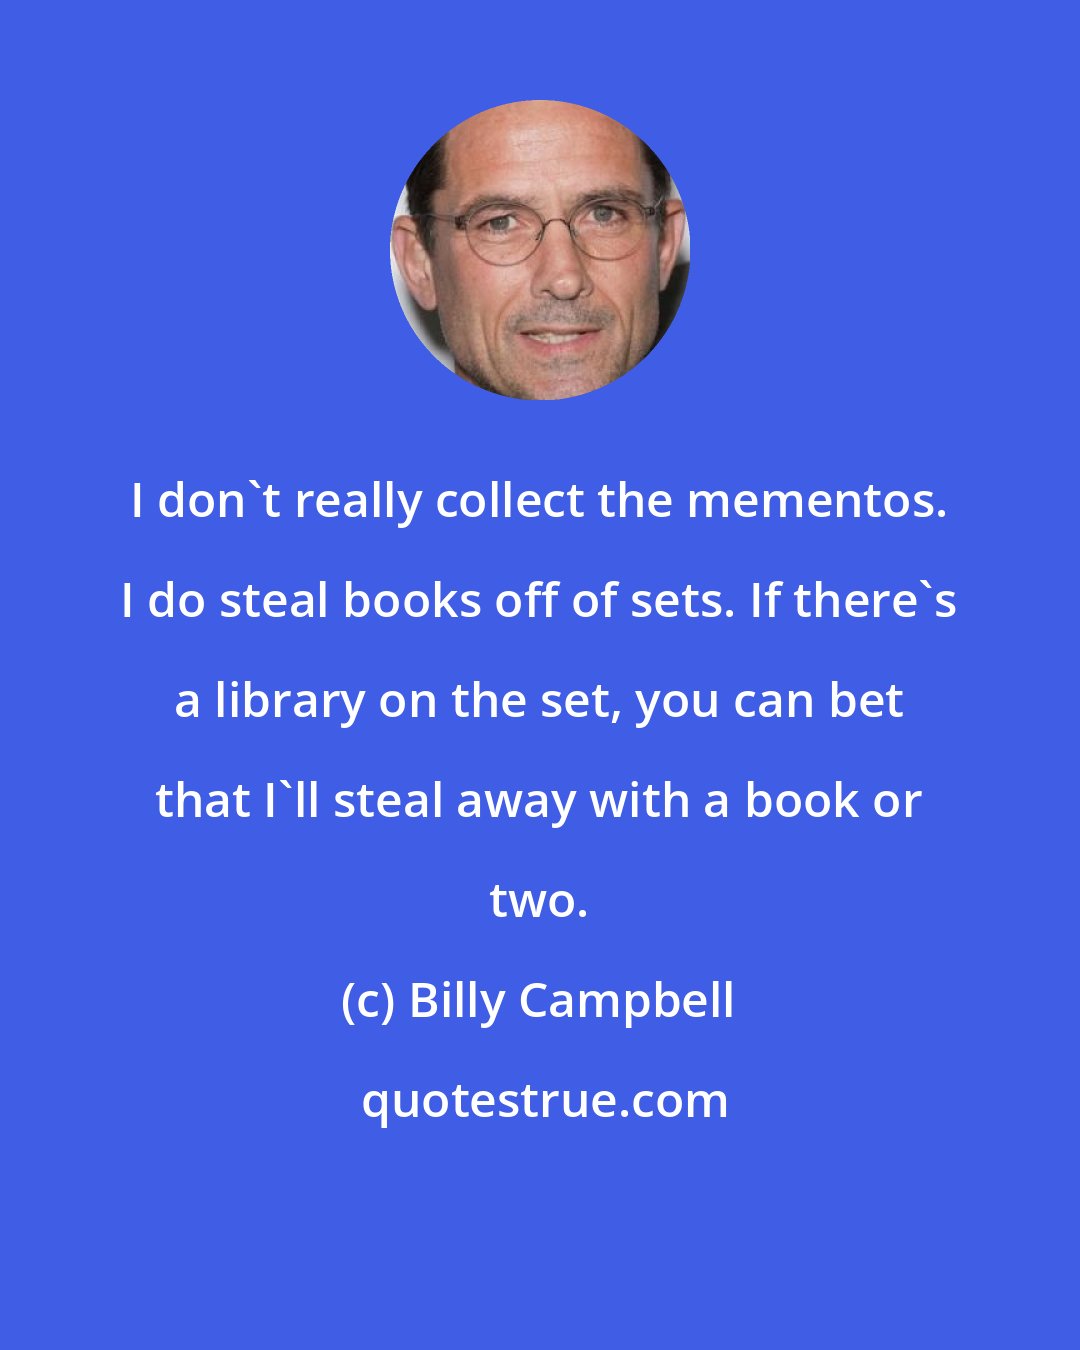 Billy Campbell: I don't really collect the mementos. I do steal books off of sets. If there's a library on the set, you can bet that I'll steal away with a book or two.